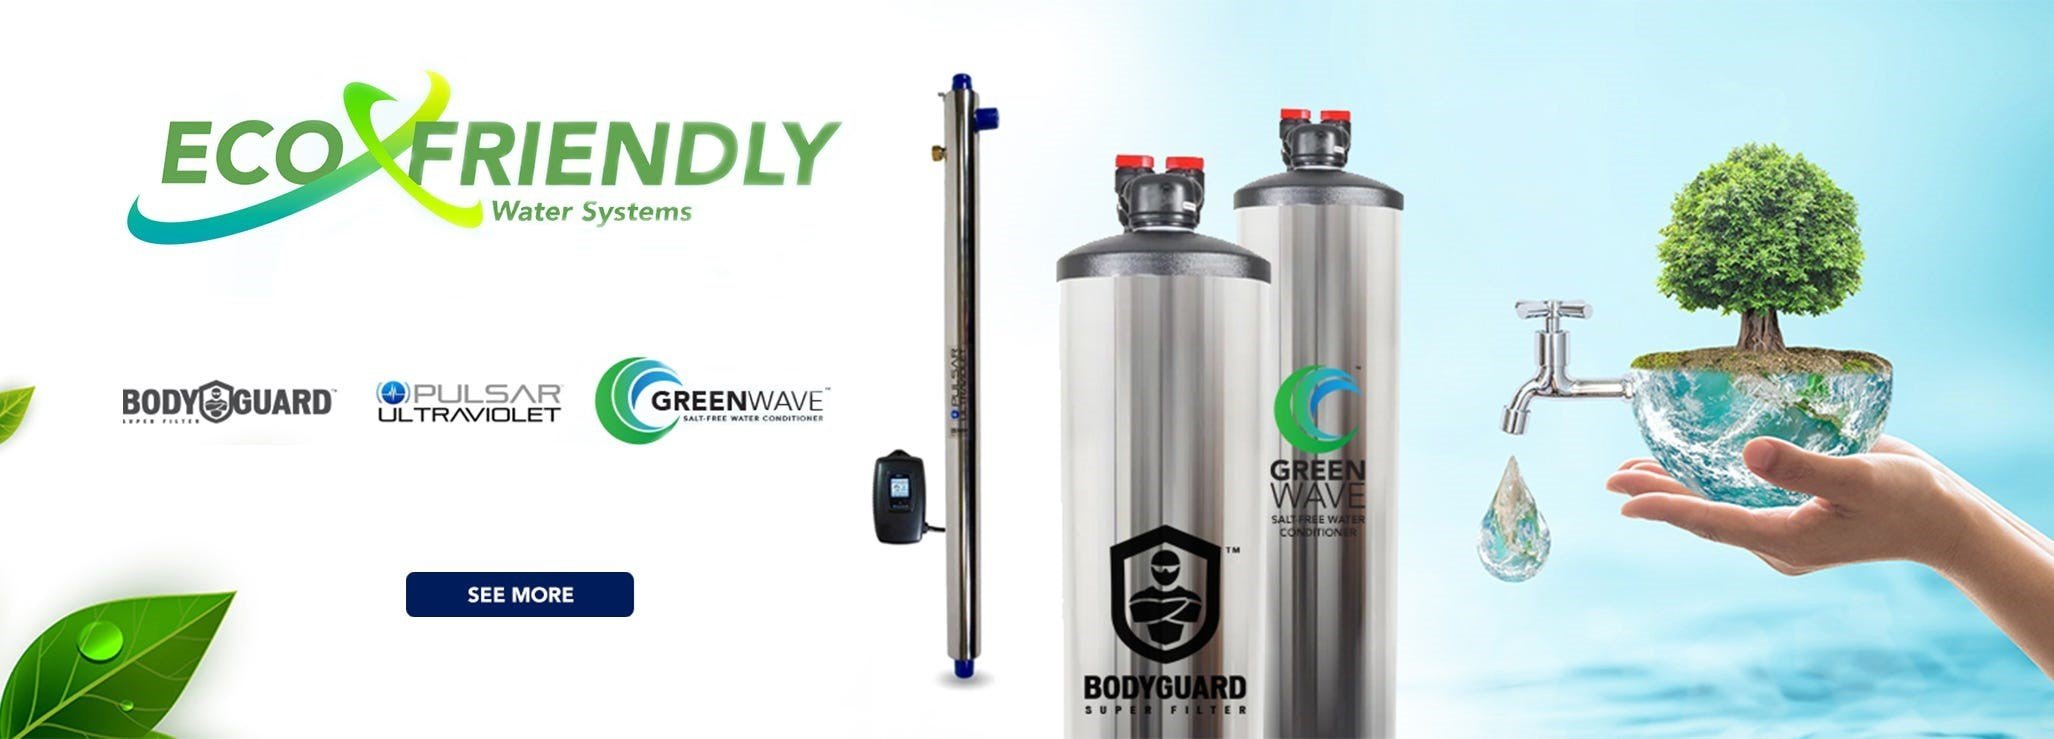 Eco Friendly Water Systems - See More